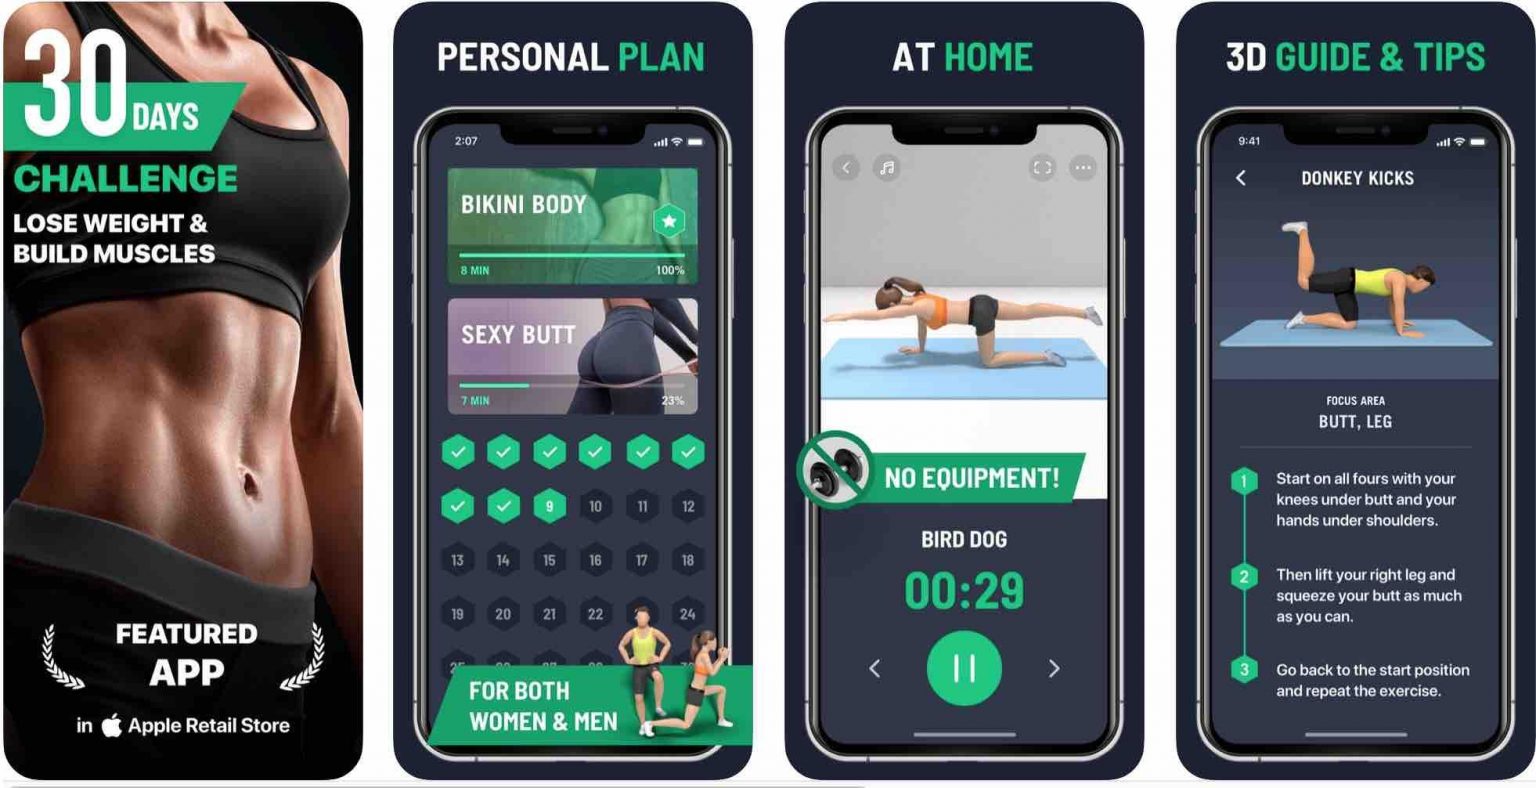  A collage of four app screenshots showing various popular workout apps for a healthy lifestyle, including a 30-day challenge, a personal workout plan, at-home workouts, and 3D exercise guides.